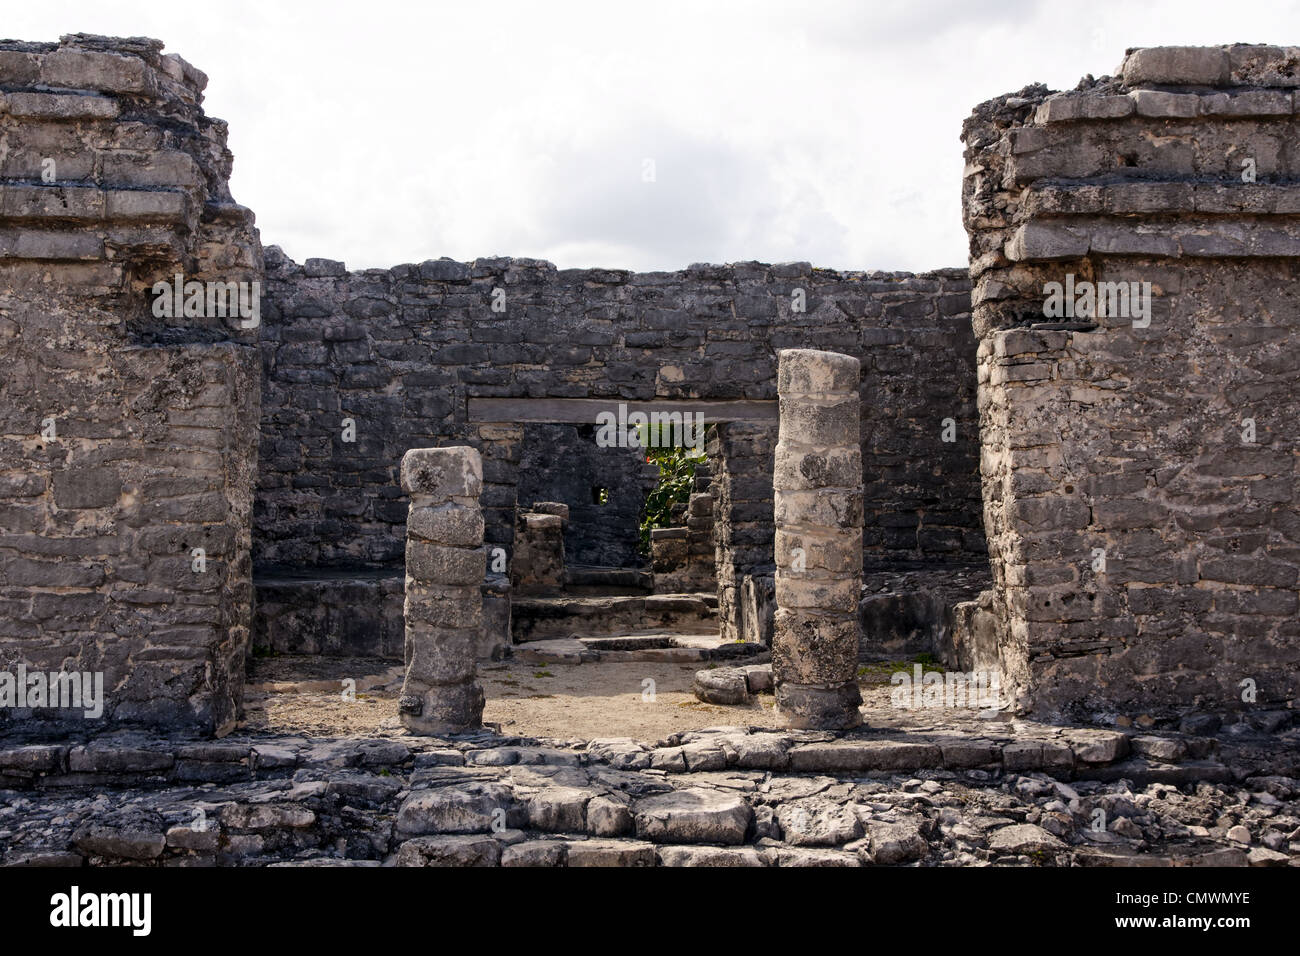 View into a Mayan ruin through the remains of it's access portal at Tulum, Quintana Roo, Mexico. Stock Photo